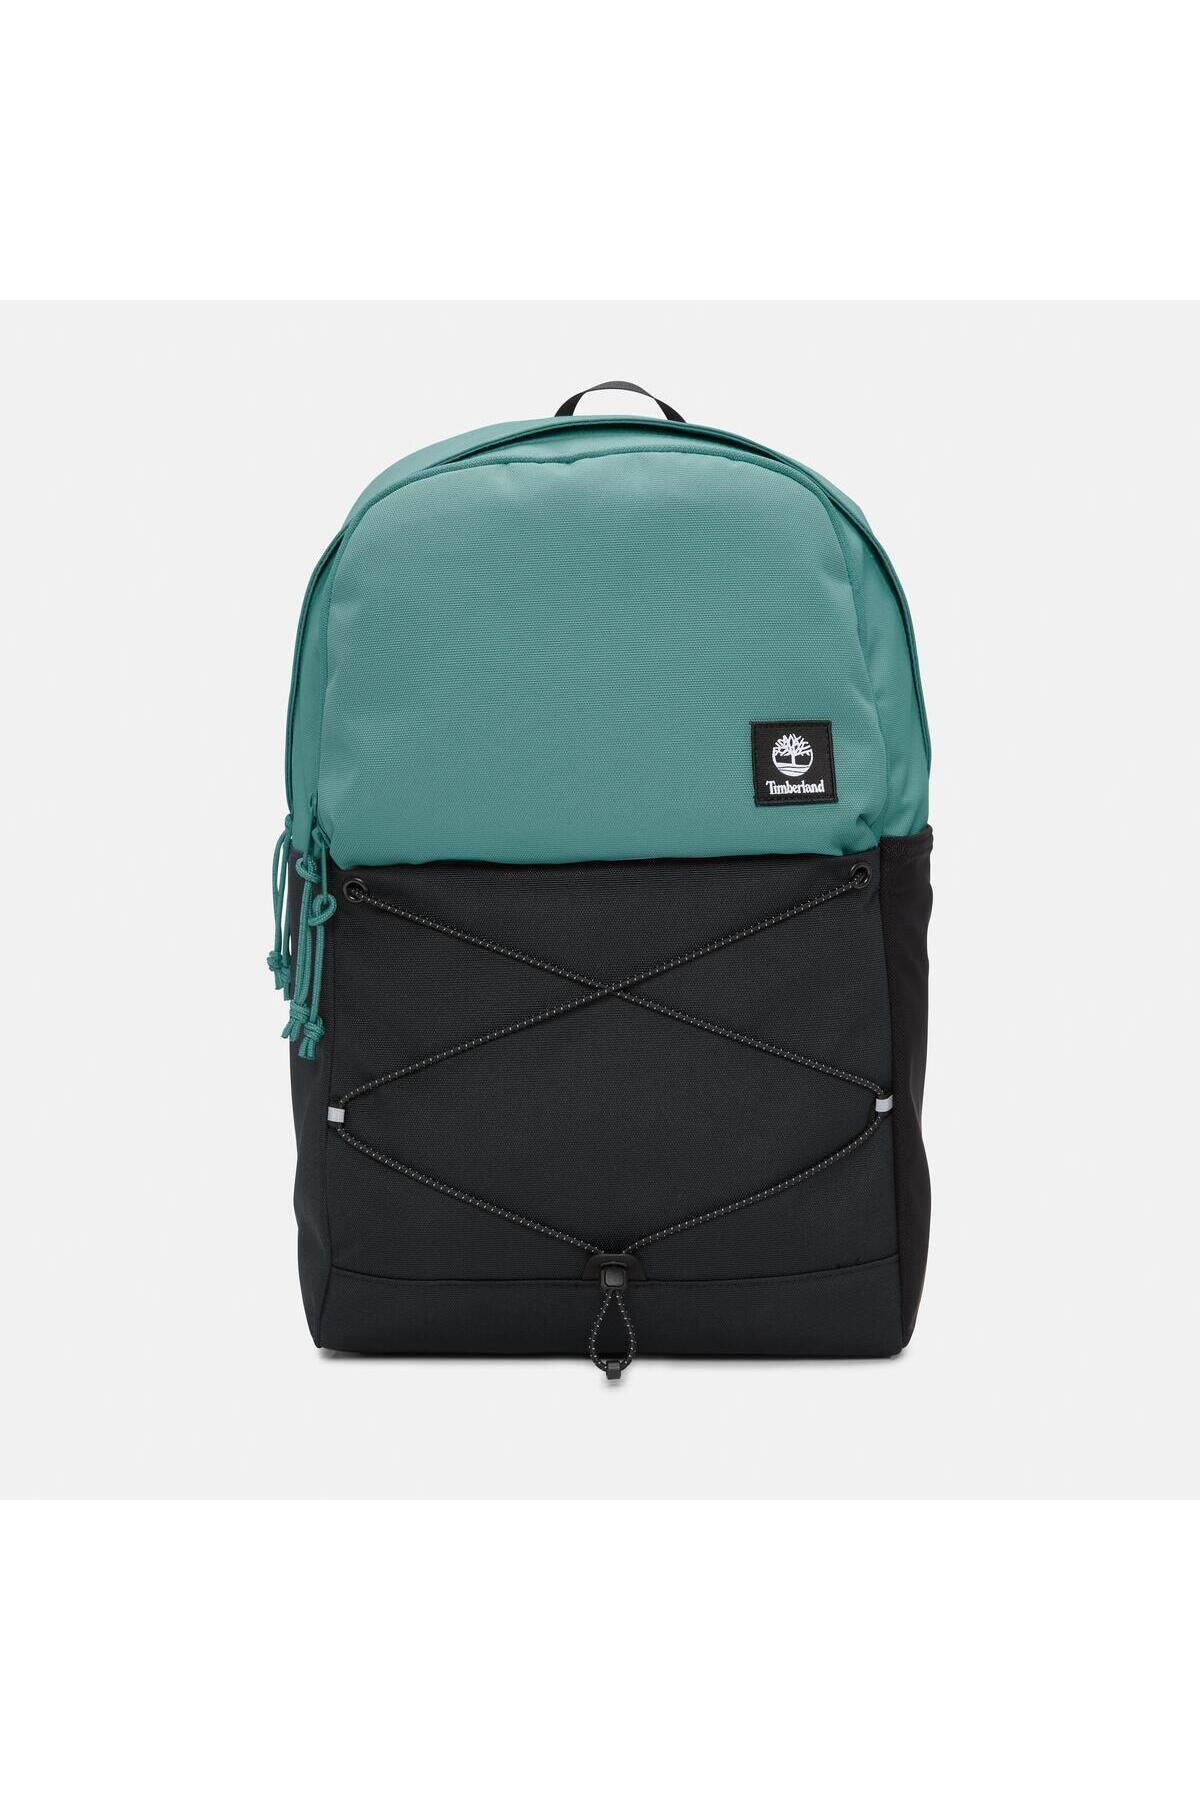 Timberland Outdoor Archive 2.0 Backpack 24 LT